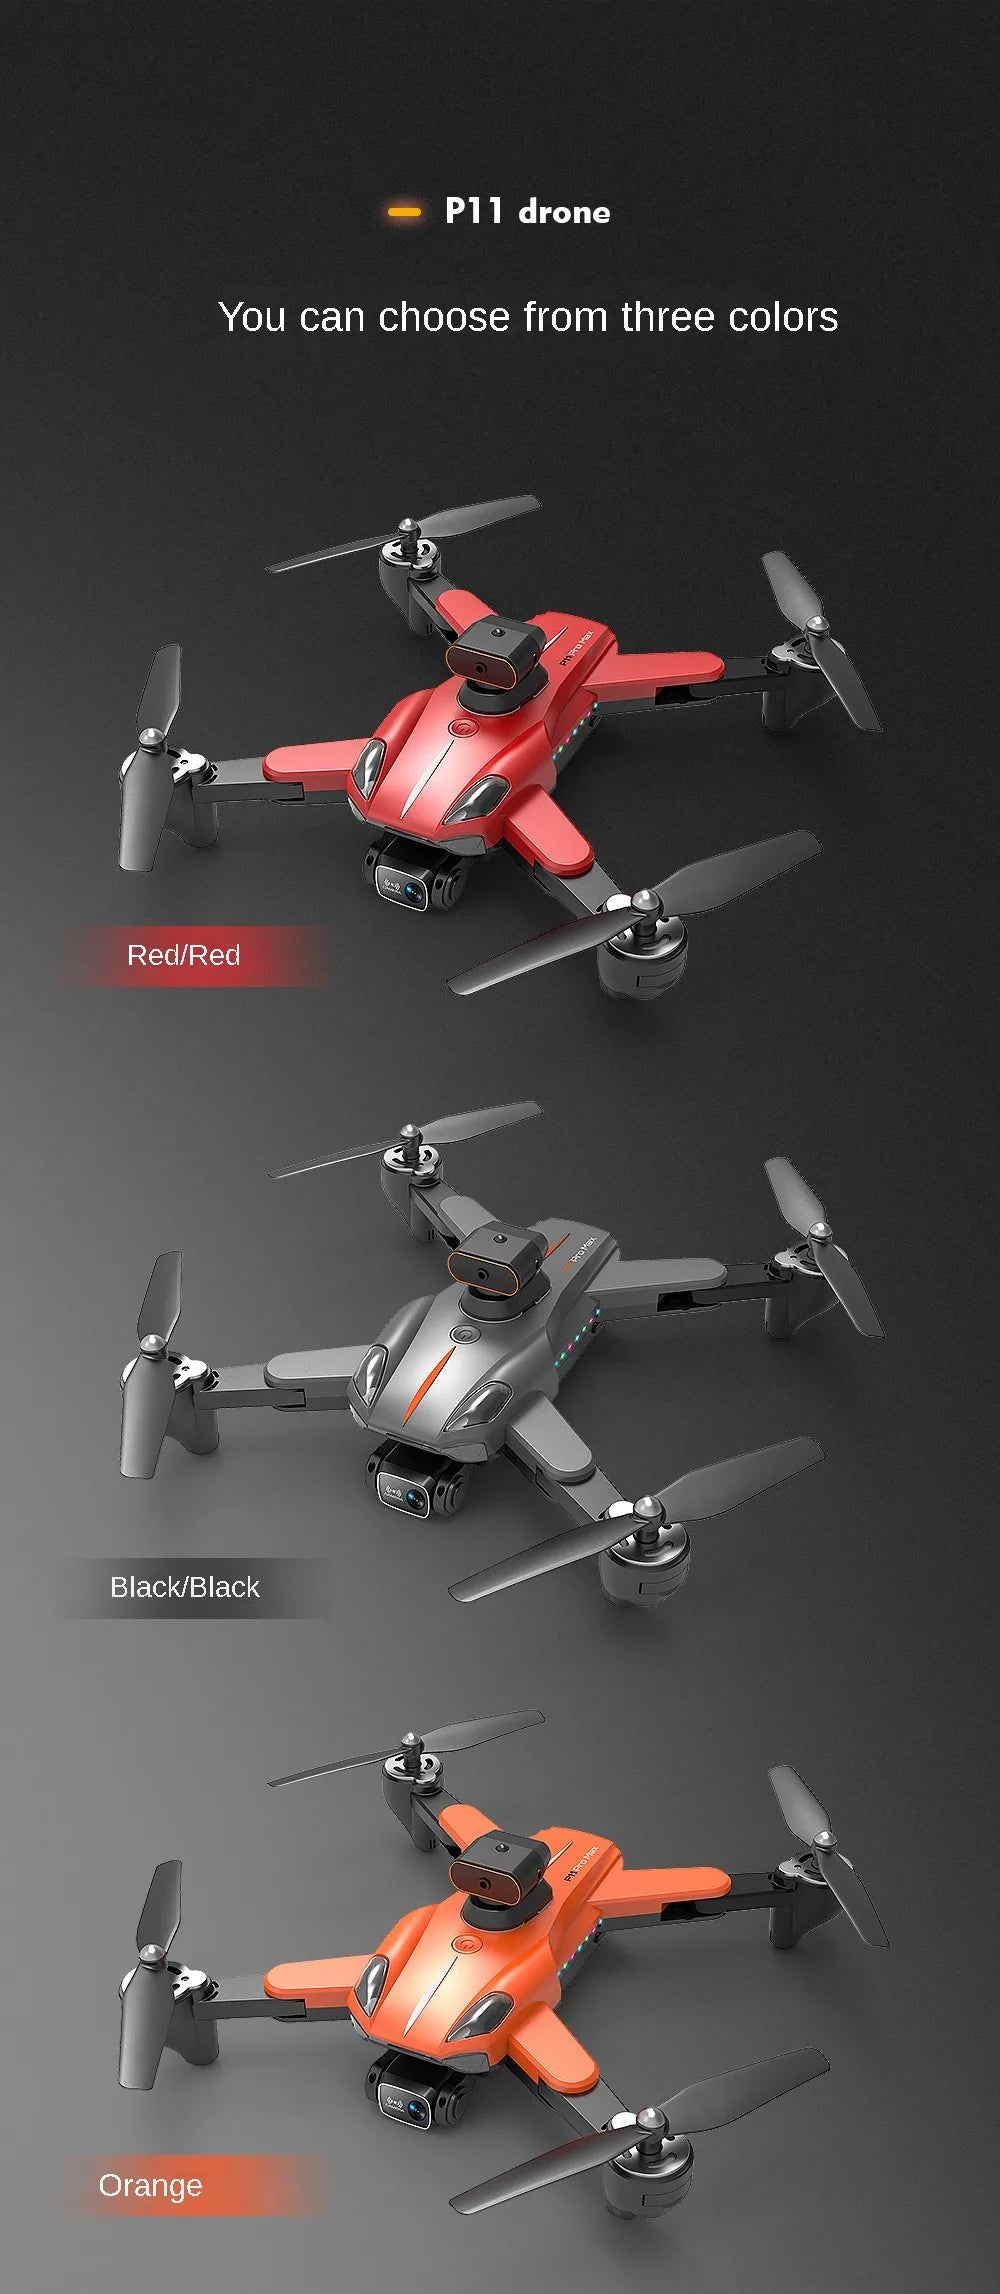 P11 Drone, p11 drone you can choose from three colors redred blackl